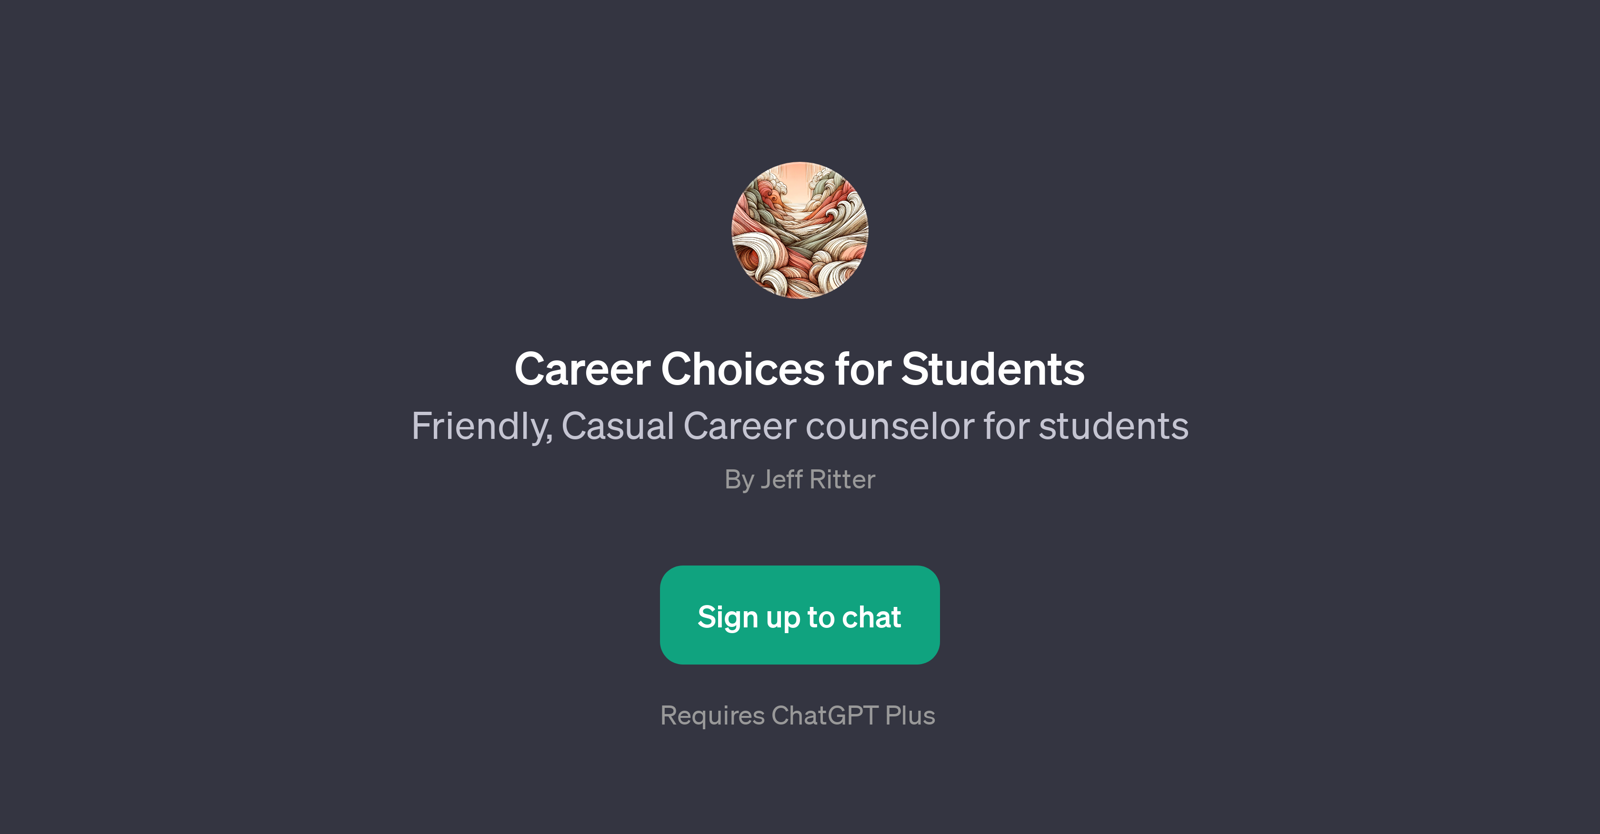 Career Choices for Students website